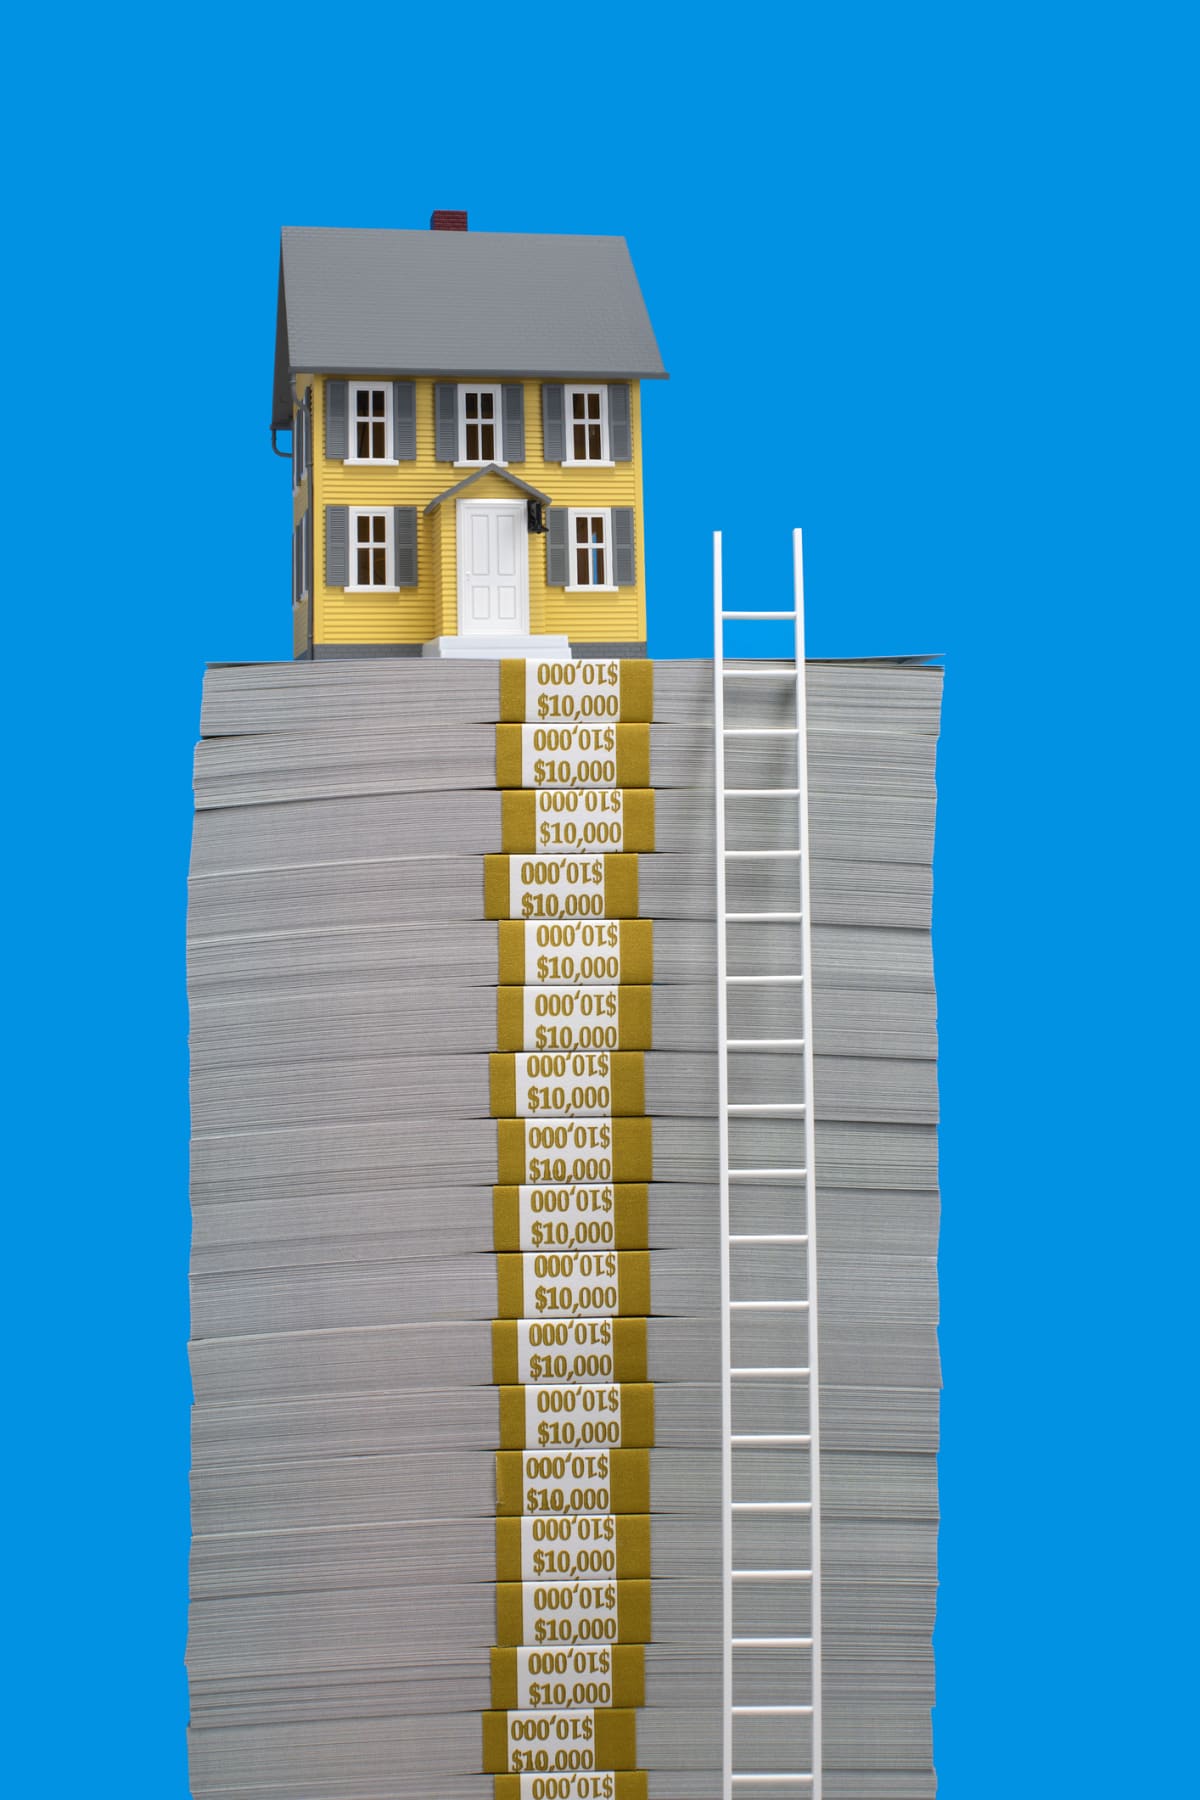 Model of yellow single family house sitting on top of stack of US $100 bill bundles with a ladder beside it, blue background